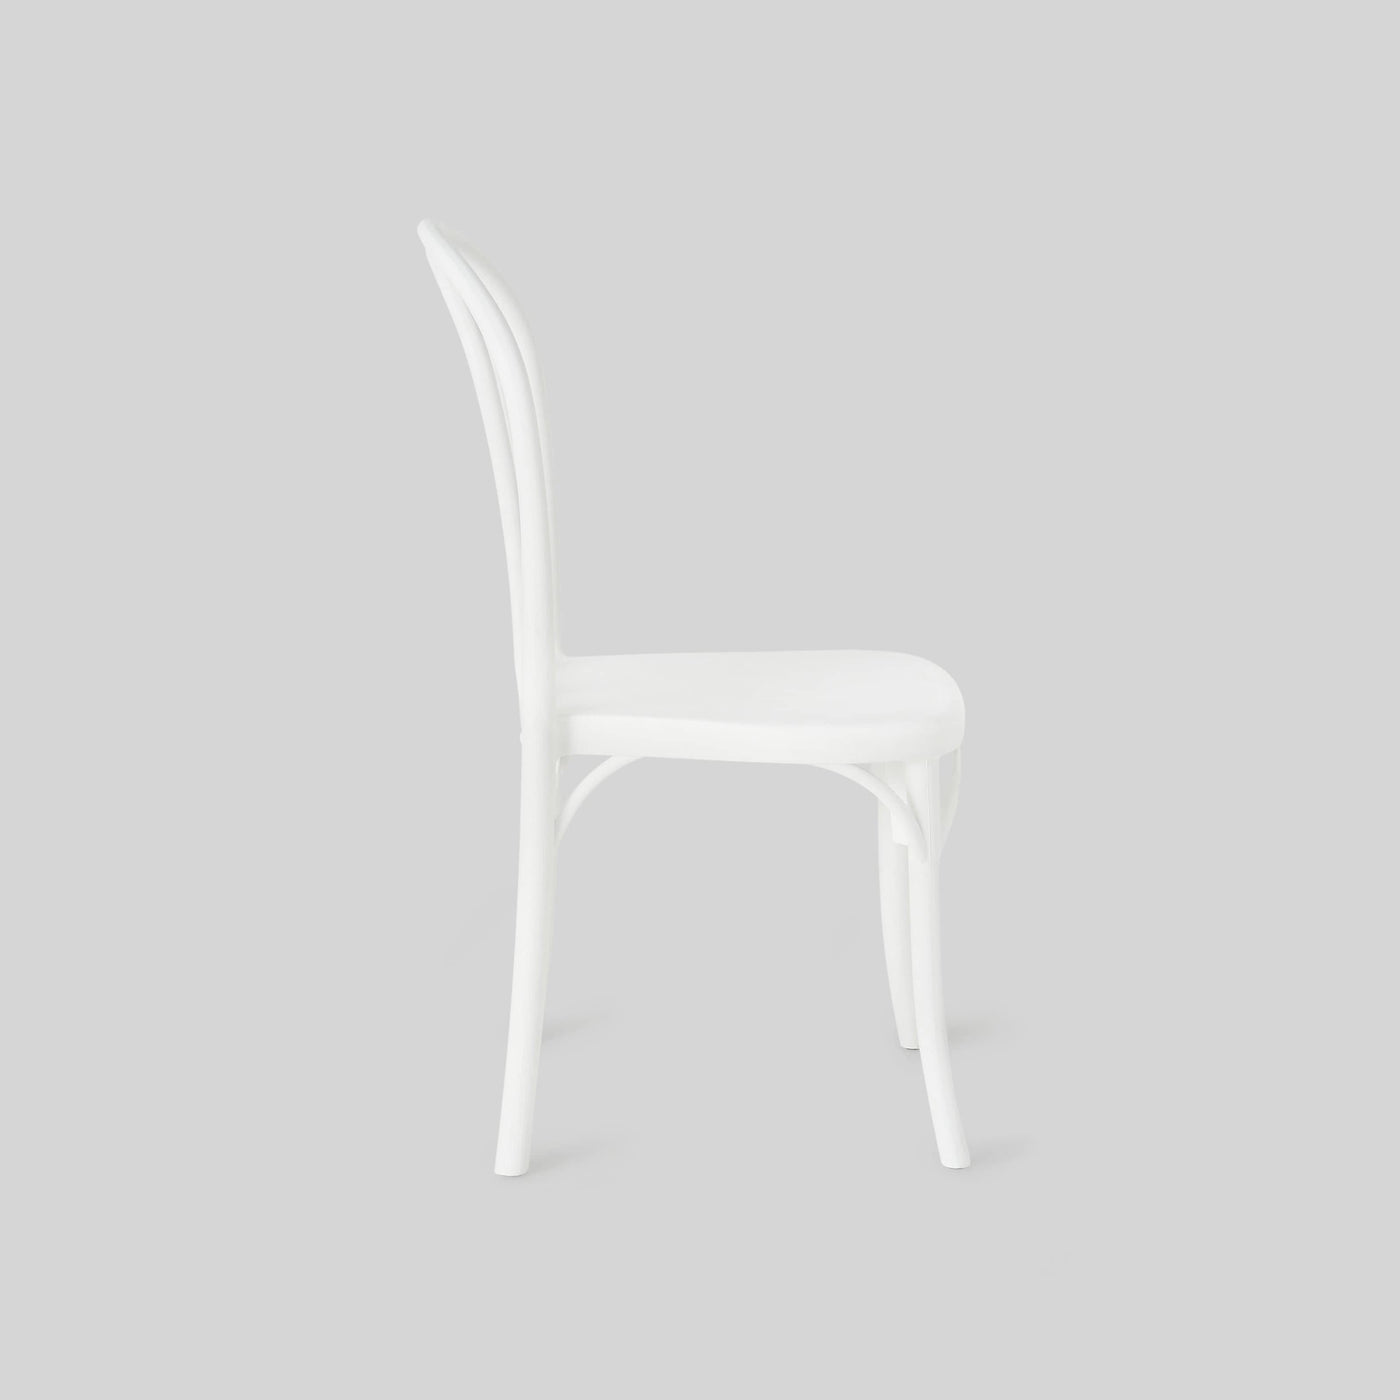 Rapha Set of 4 Dining Chairs, White - 3